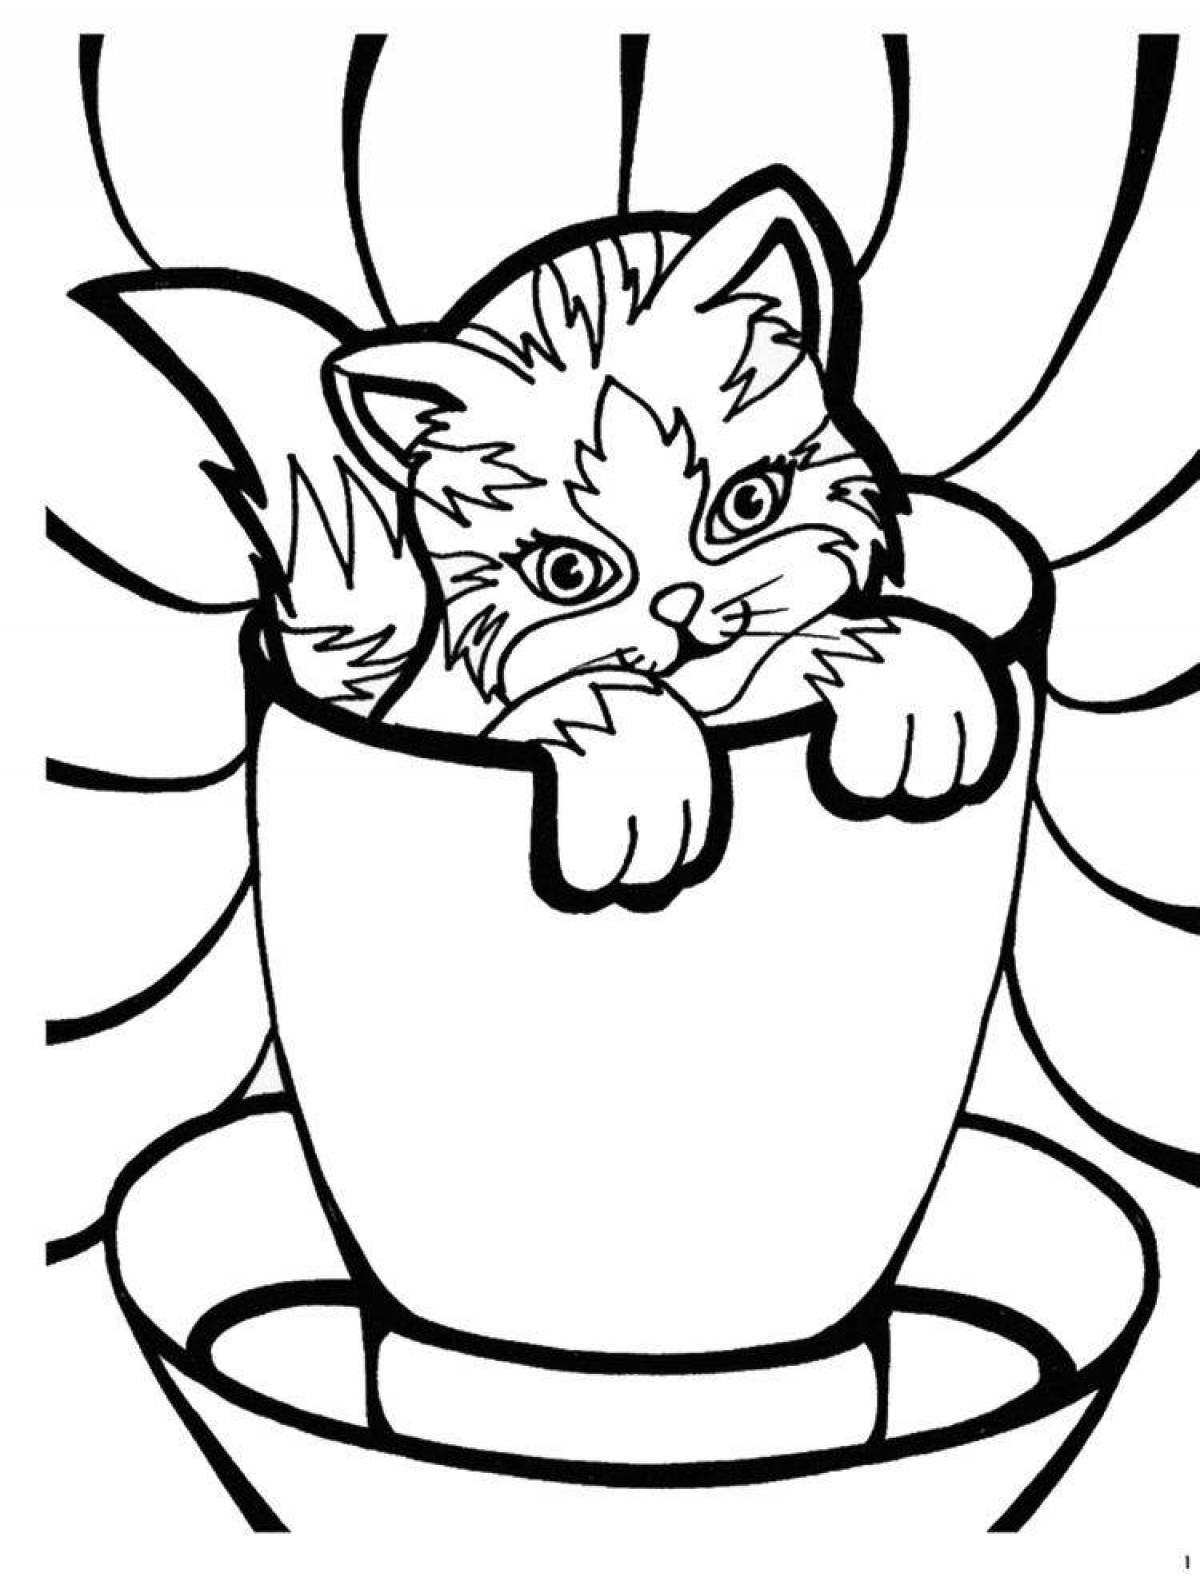 Coloring page fluffy cat in a mug